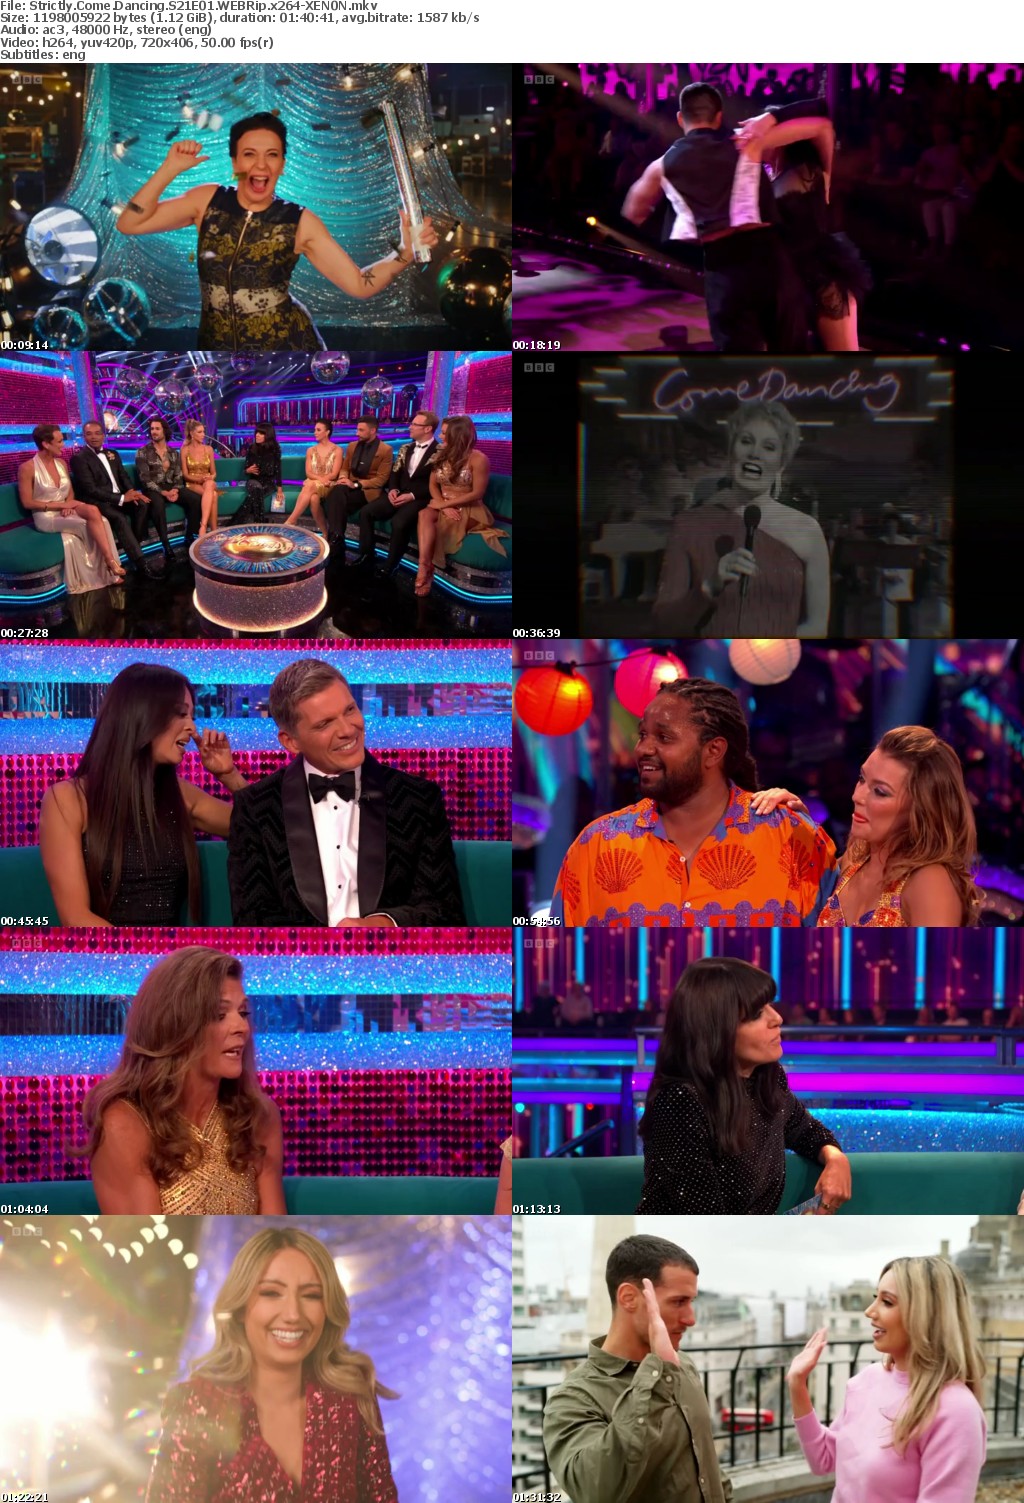 Strictly Come Dancing S21E01 WEBRip x264-XEN0N Saturn5